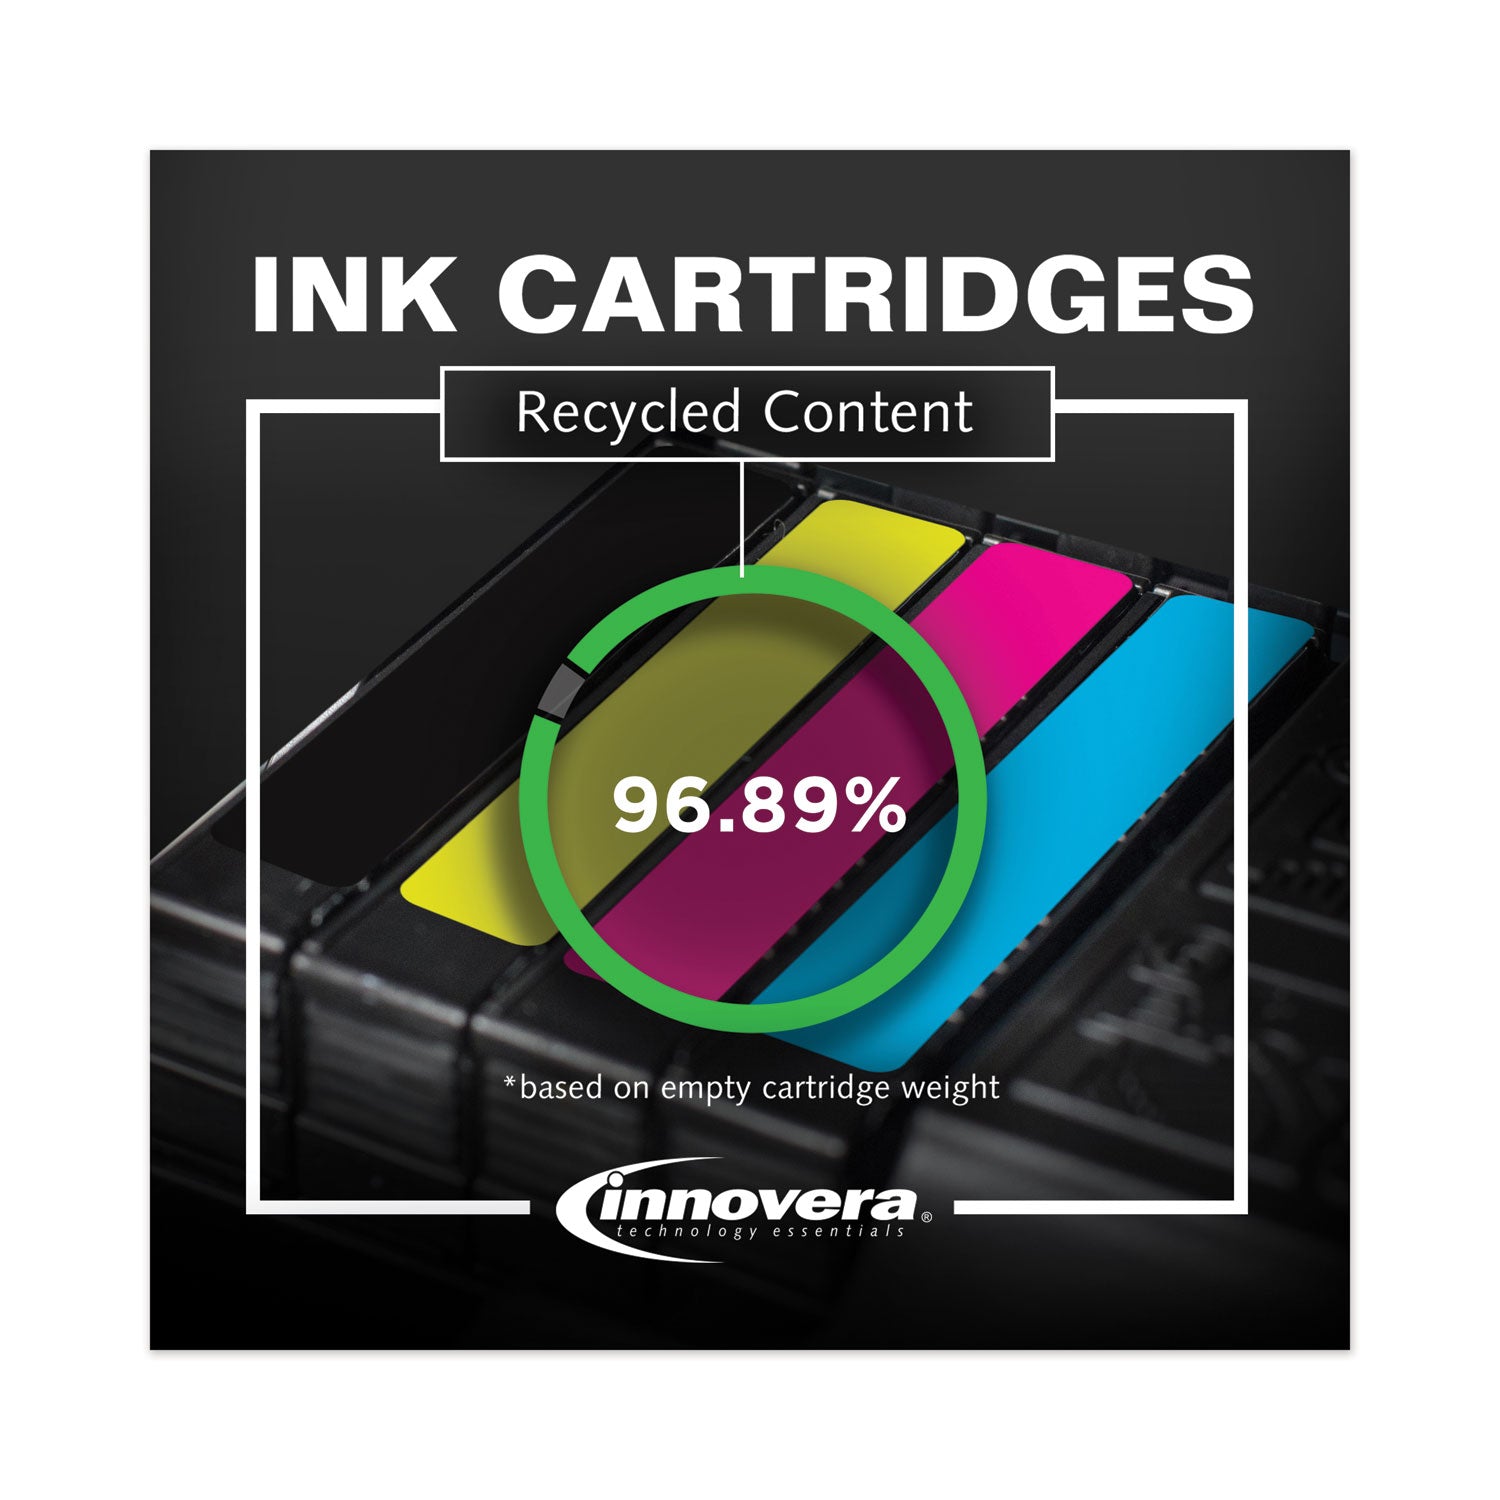 Remanufactured Magenta Extra High-Yield Ink, Replacement for LC79M, 1,200 Page-Yield - 